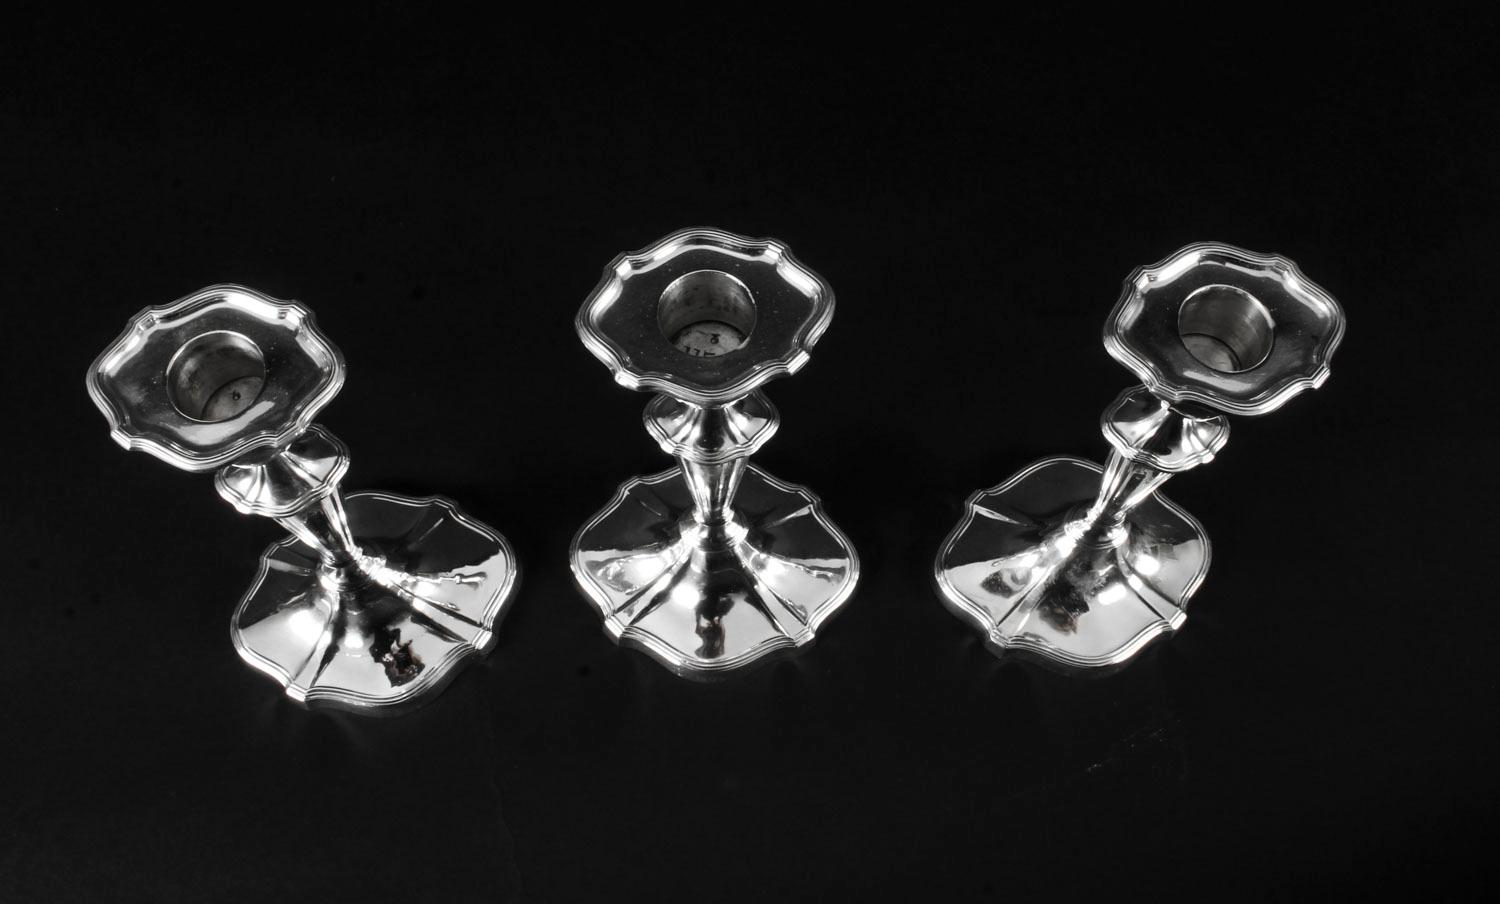 Antique Set of 3 Sterling Silver Candlesticks William Gibson & John Langman 1895 For Sale 8